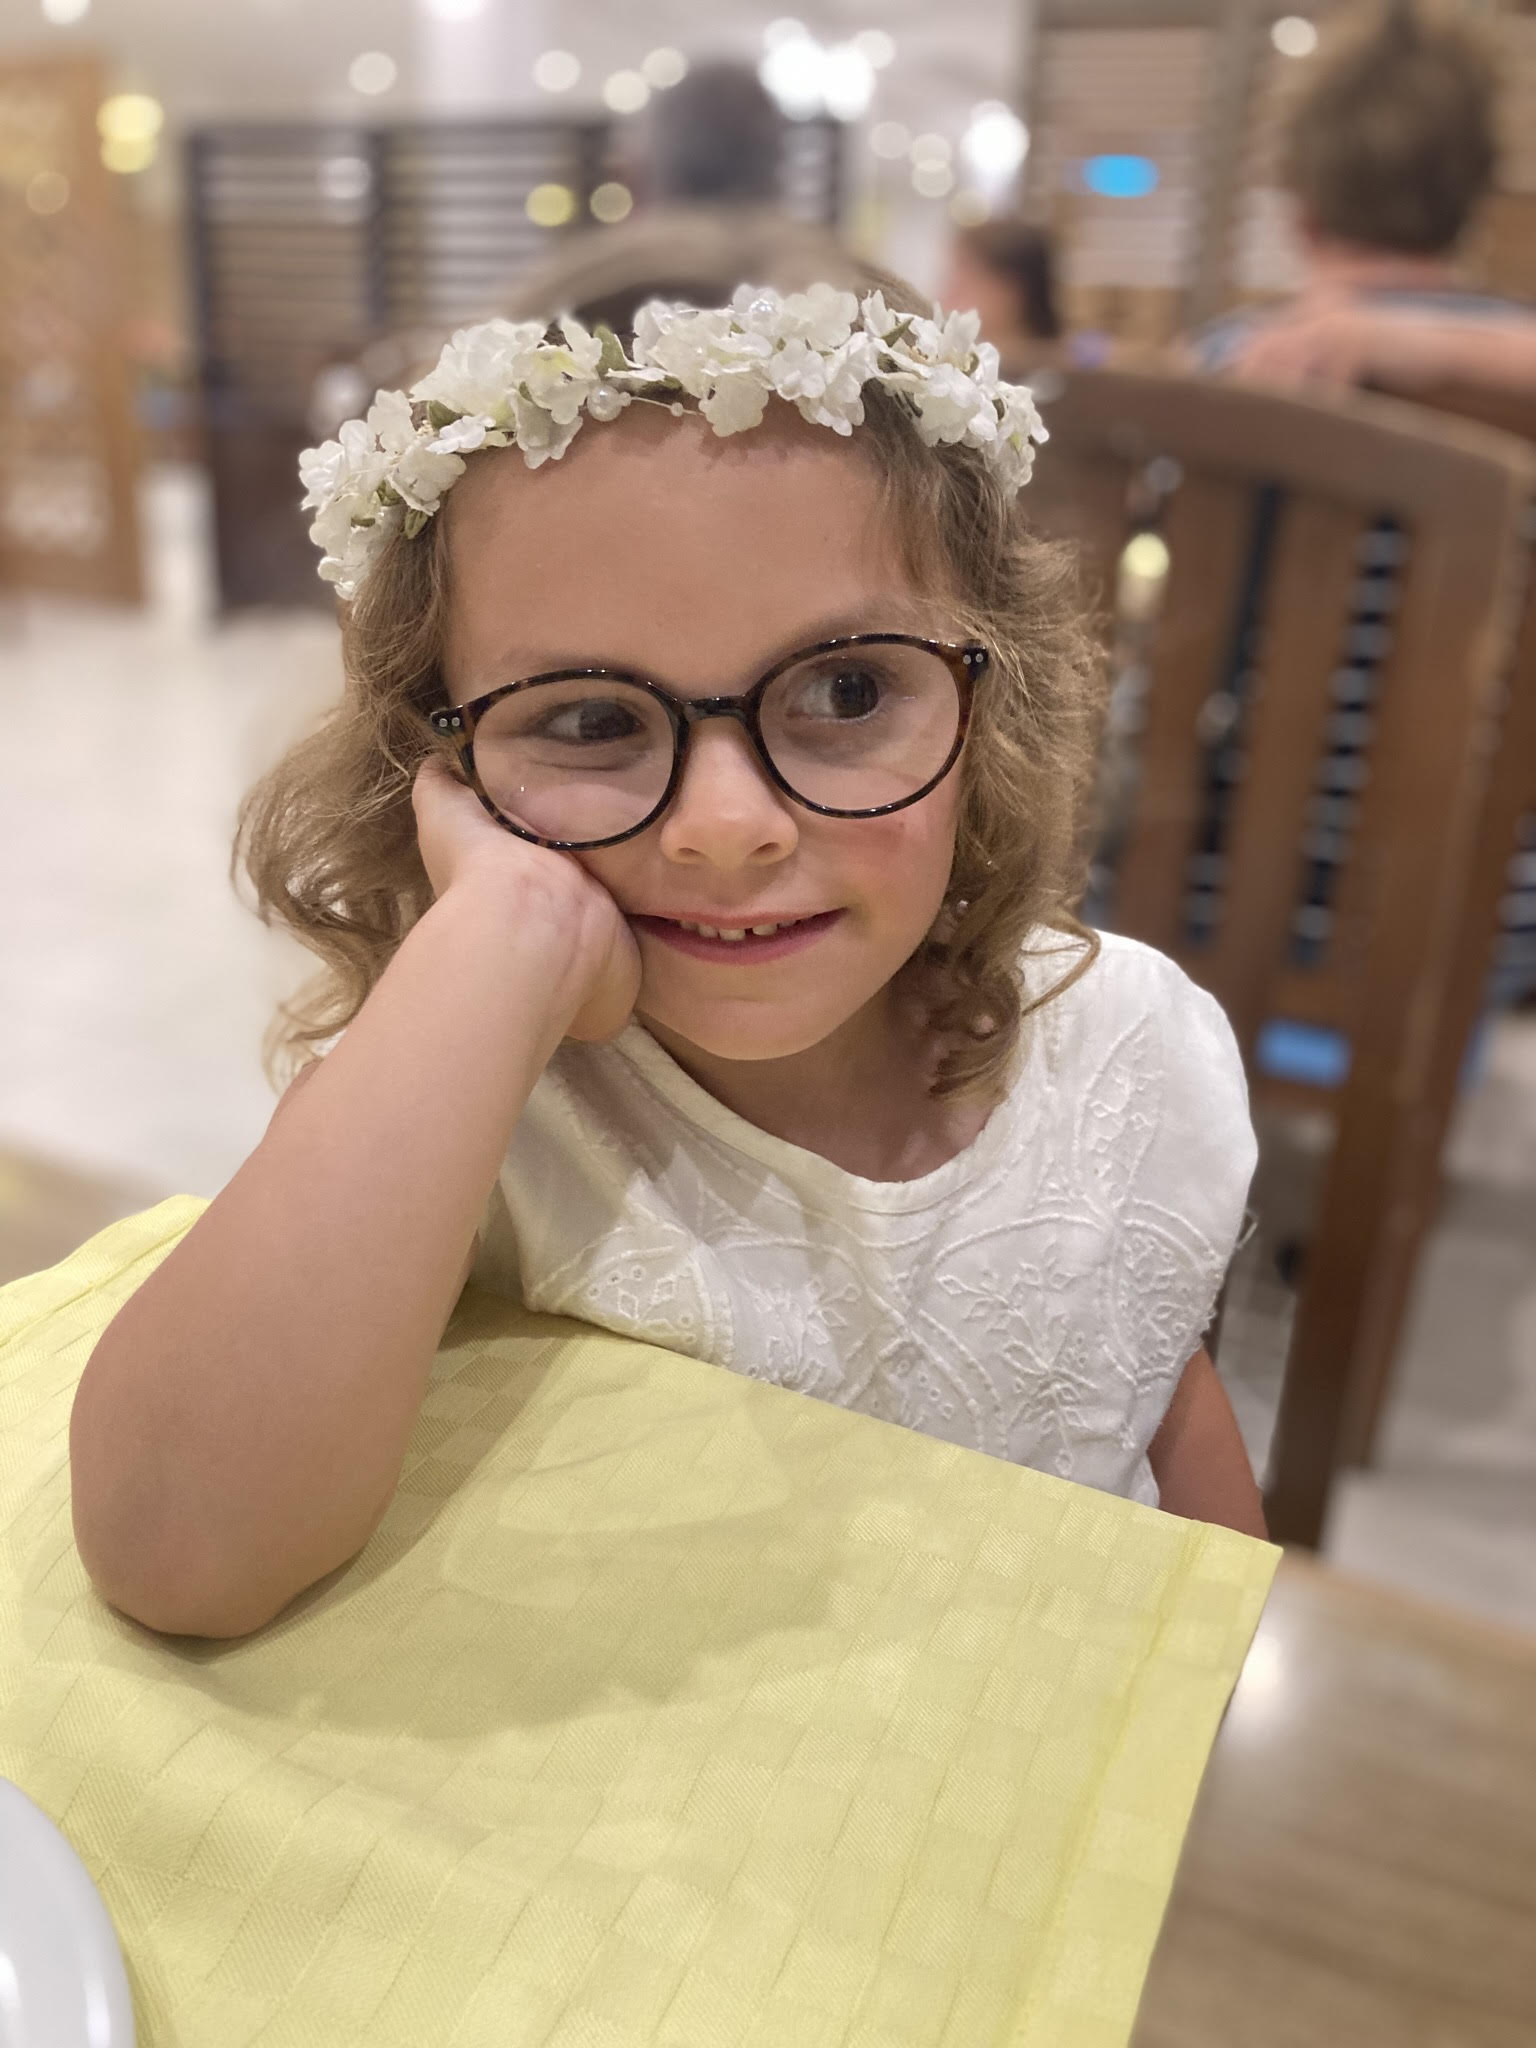 Claudia wears a white top, glasses and a floral crown.